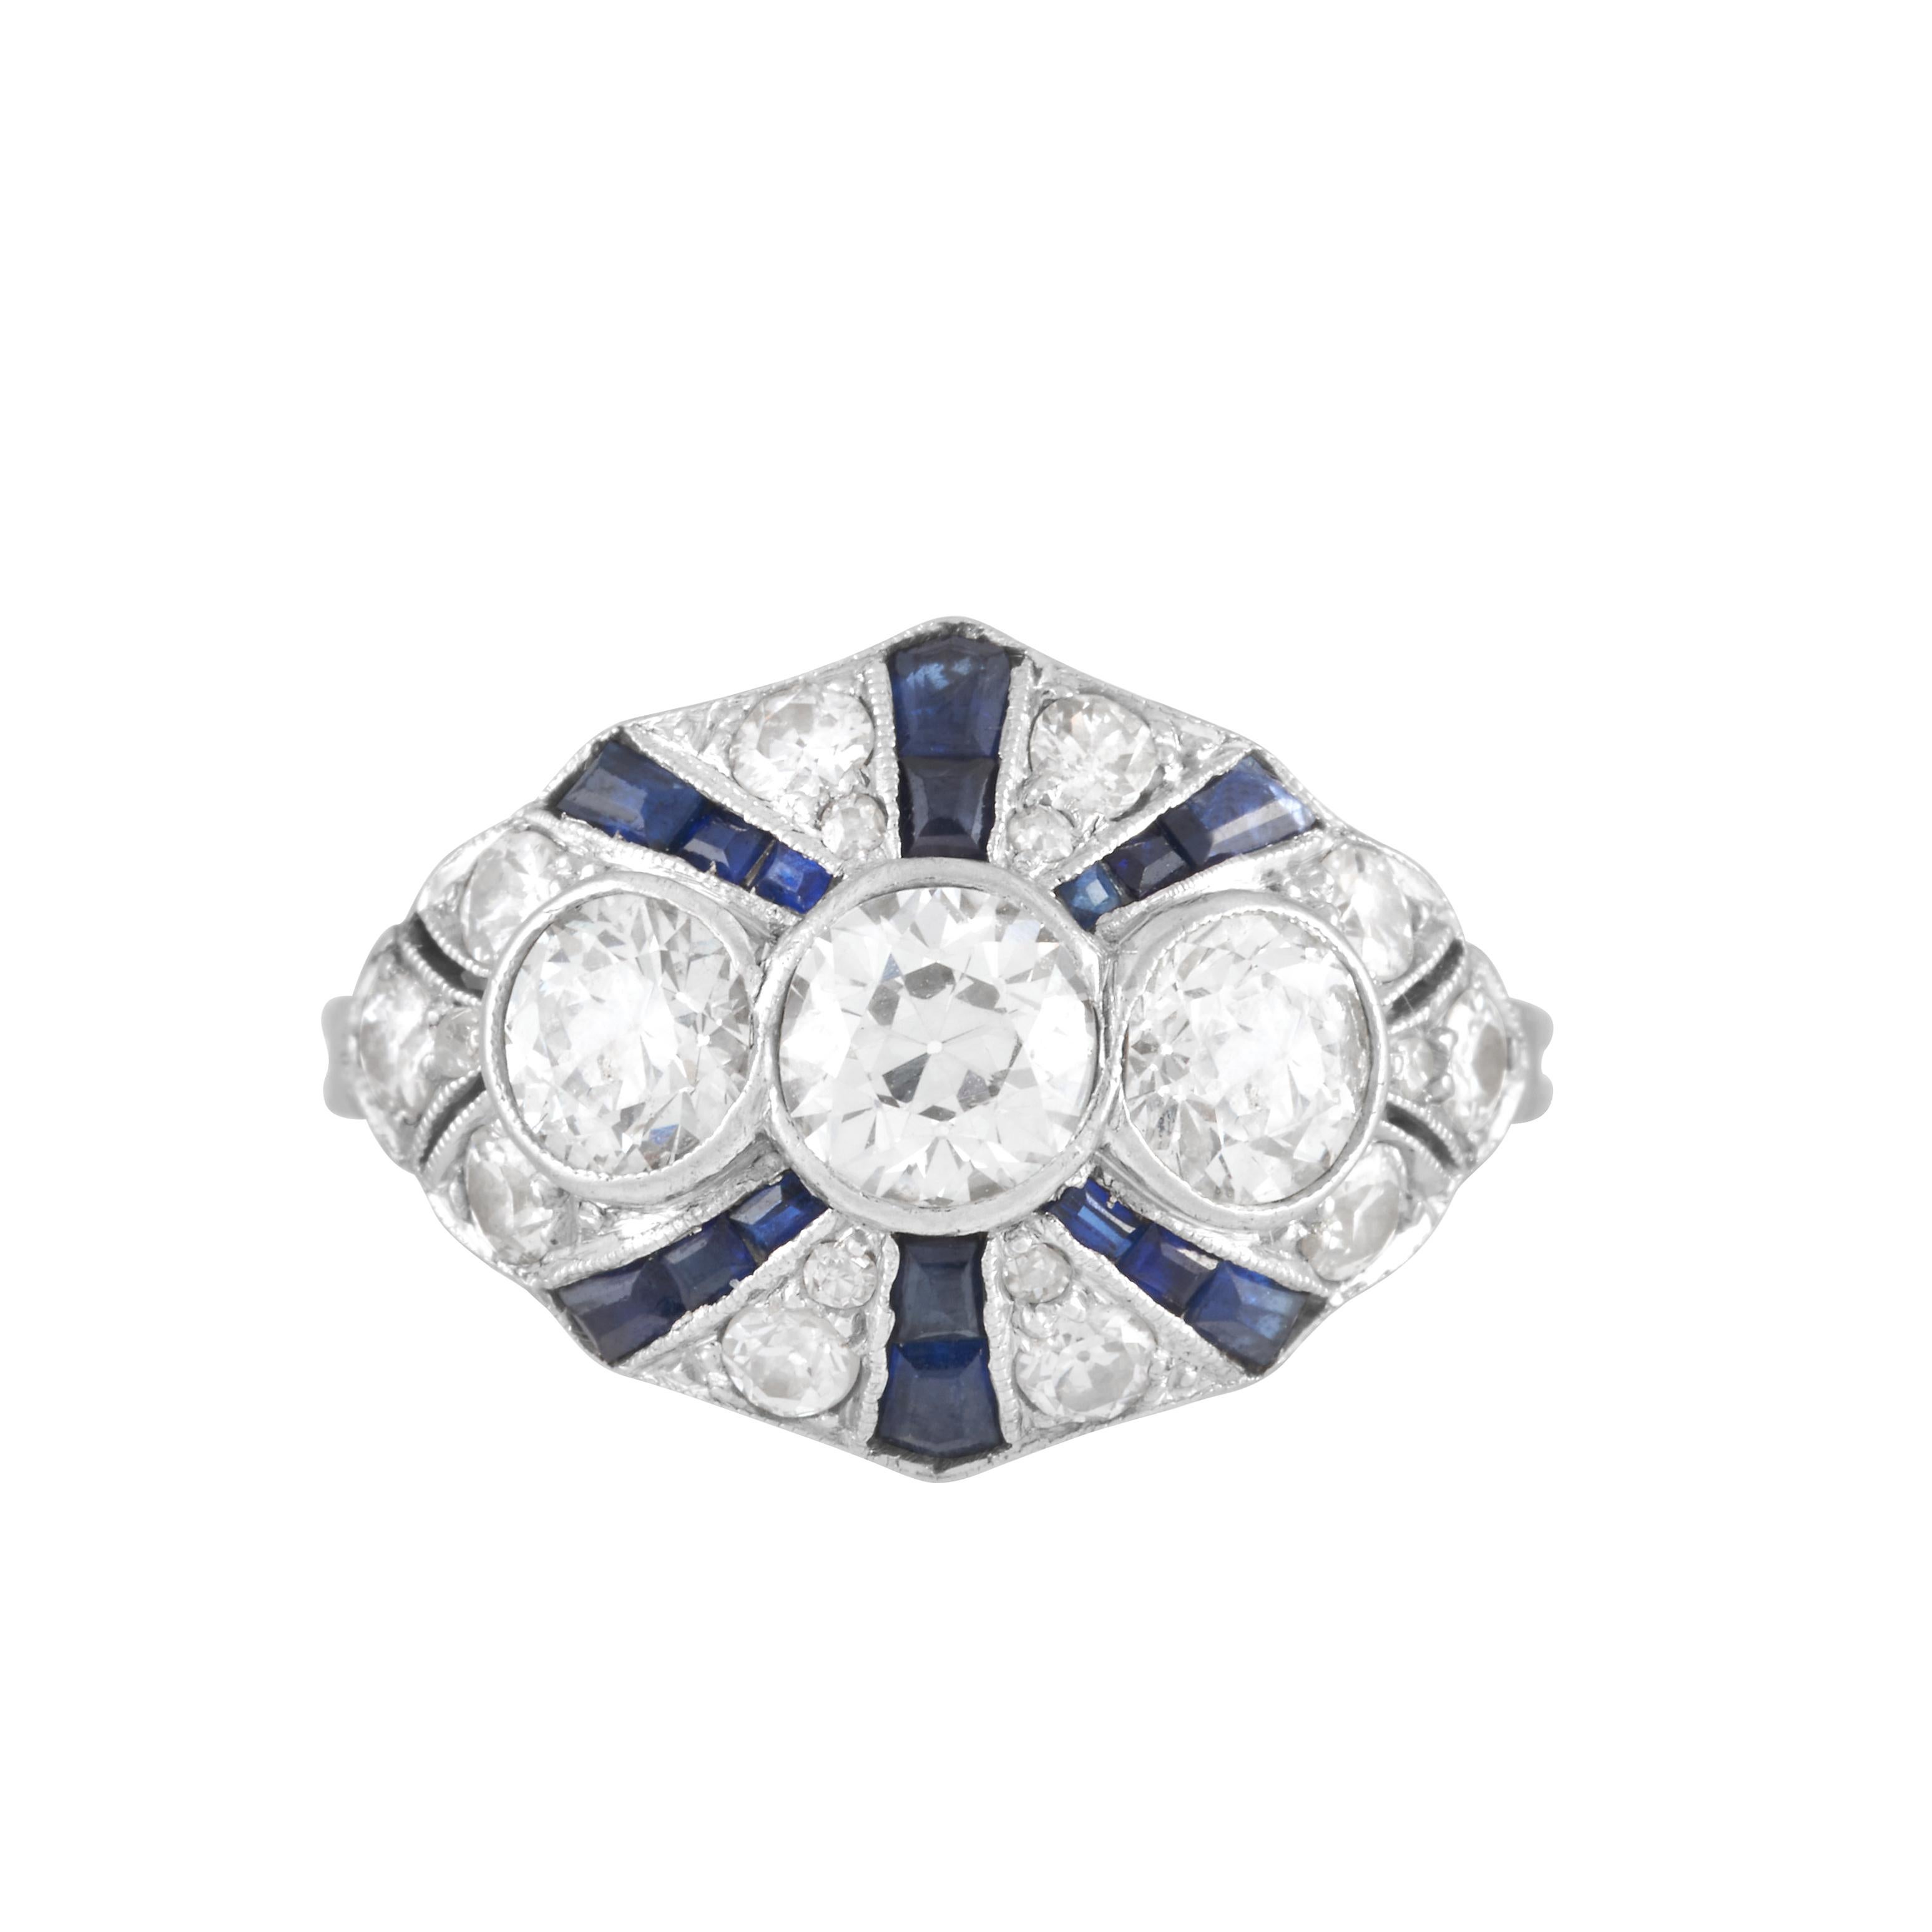 Art Deco ring with three bezel set Old European cut diamonds and radiating rows of synthetic sapphires set in platinum.
 
The center diamond of this ring weighs approximately 0.55 carat with J color and VS2 clarity, the two side diamonds total